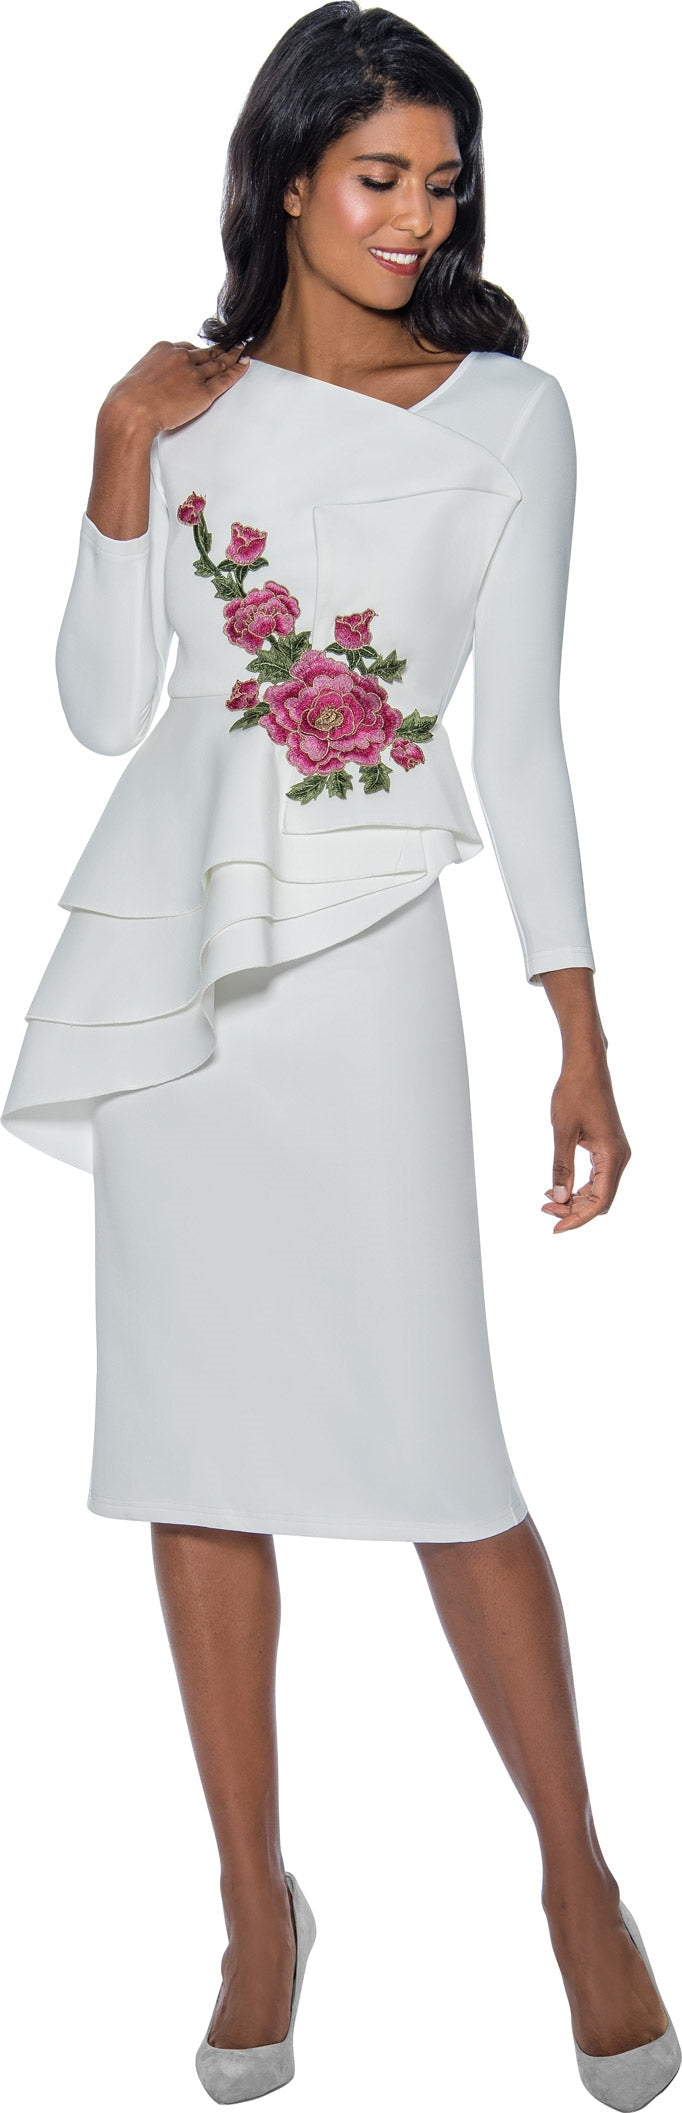 Church Dress By Nubiano 771 - Church Suits For Less